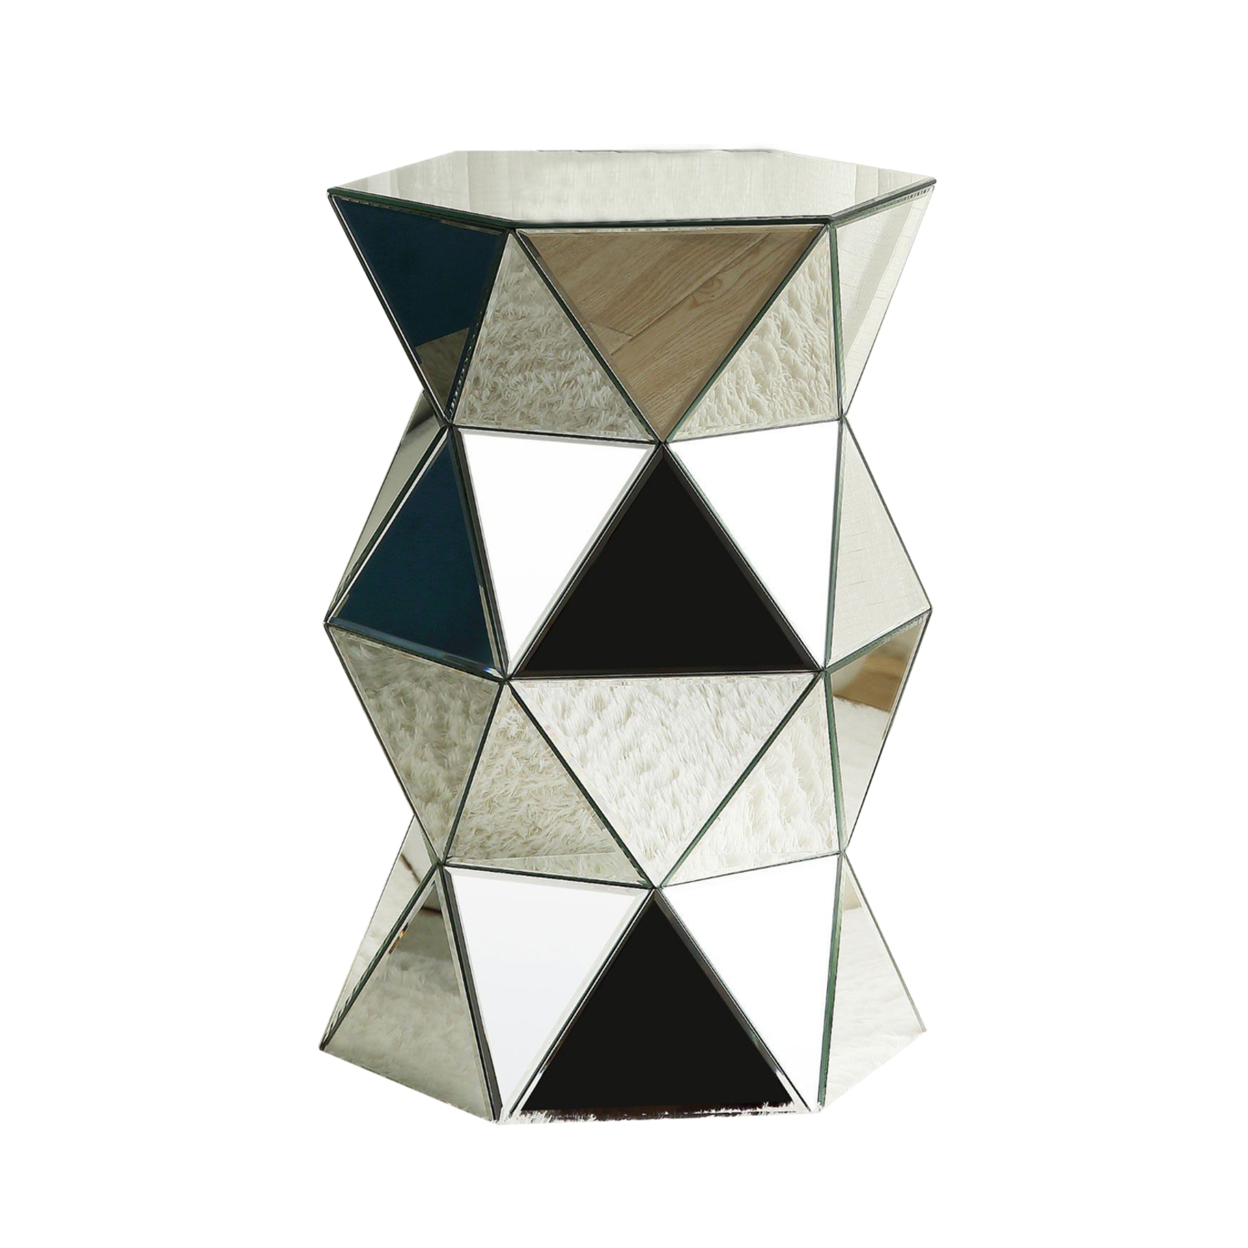 Mirrored Pedestal With Geometric Design And Faceted Sides, Silver- Saltoro Sherpi